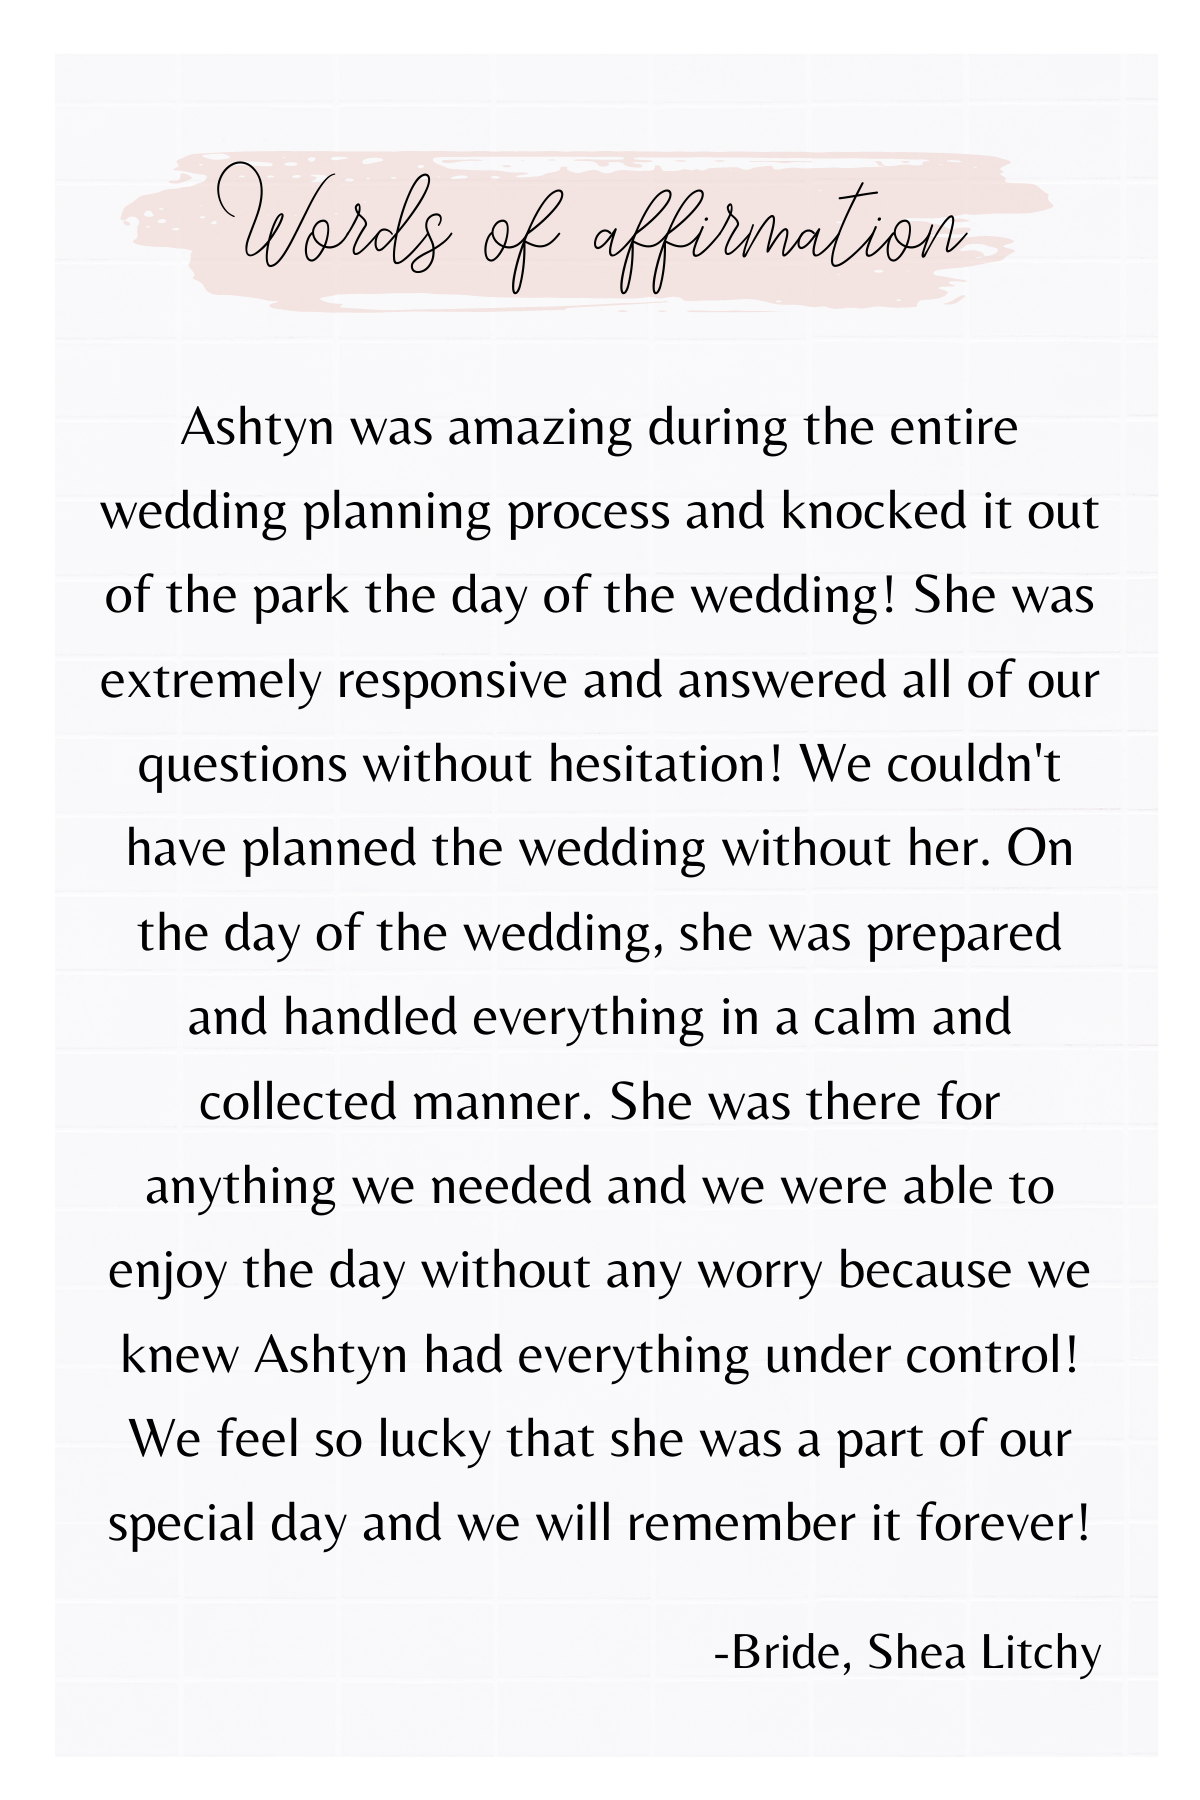 Ashtyn was absolutely amazing during the entire wedding planning process and knocked it out of the park the day of the wedding! She was extremely responsive and answered all of our questions without hesitation! We co